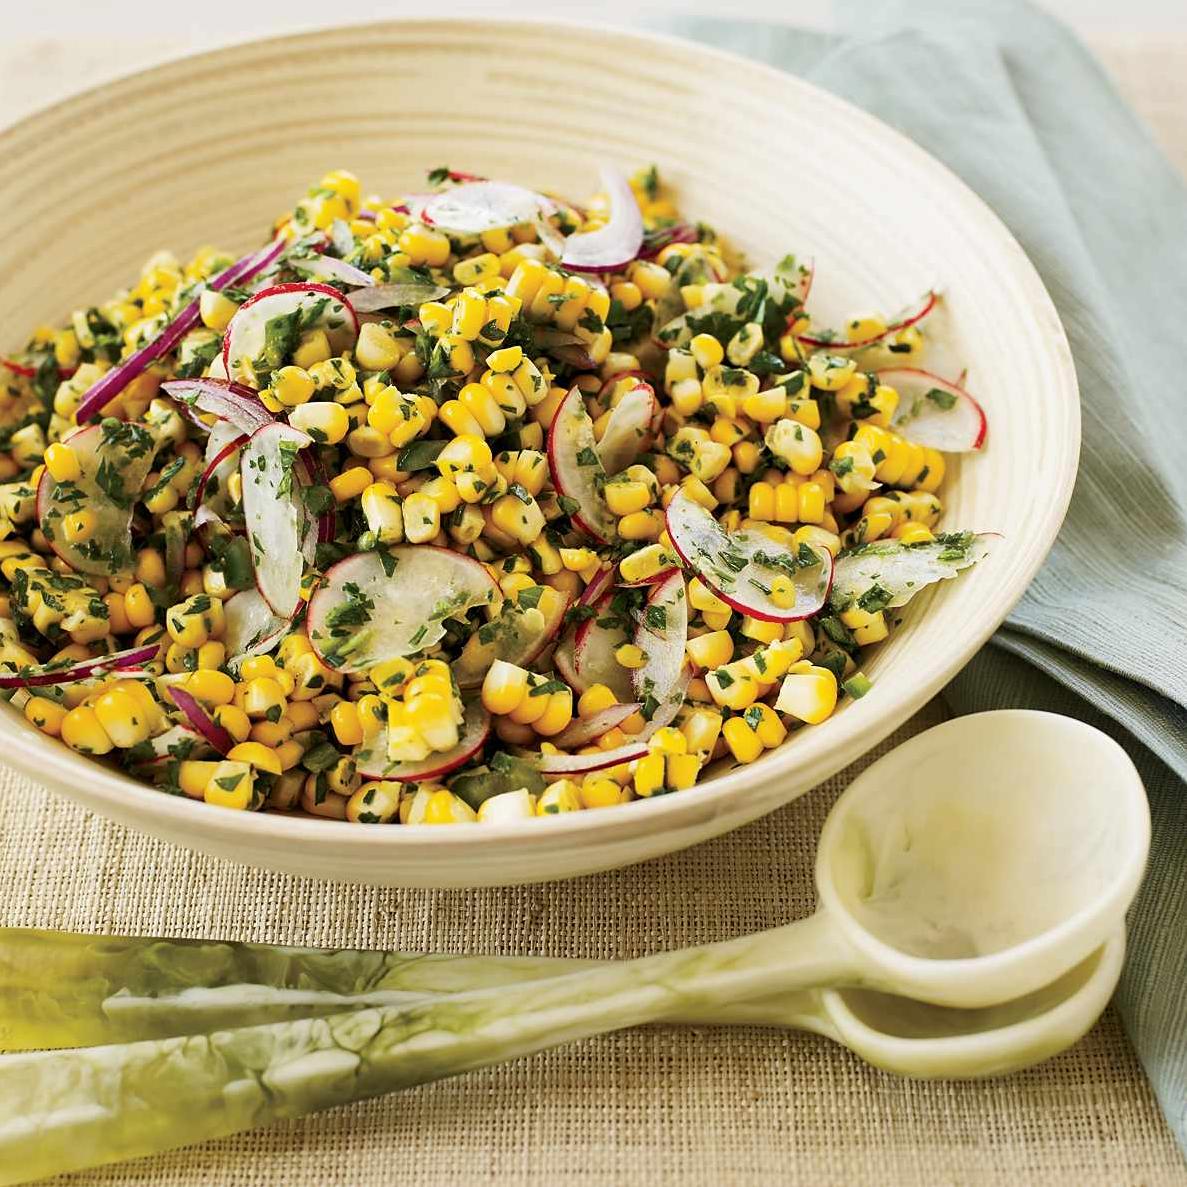  Who said salads have to be boring? This one will prove them wrong!